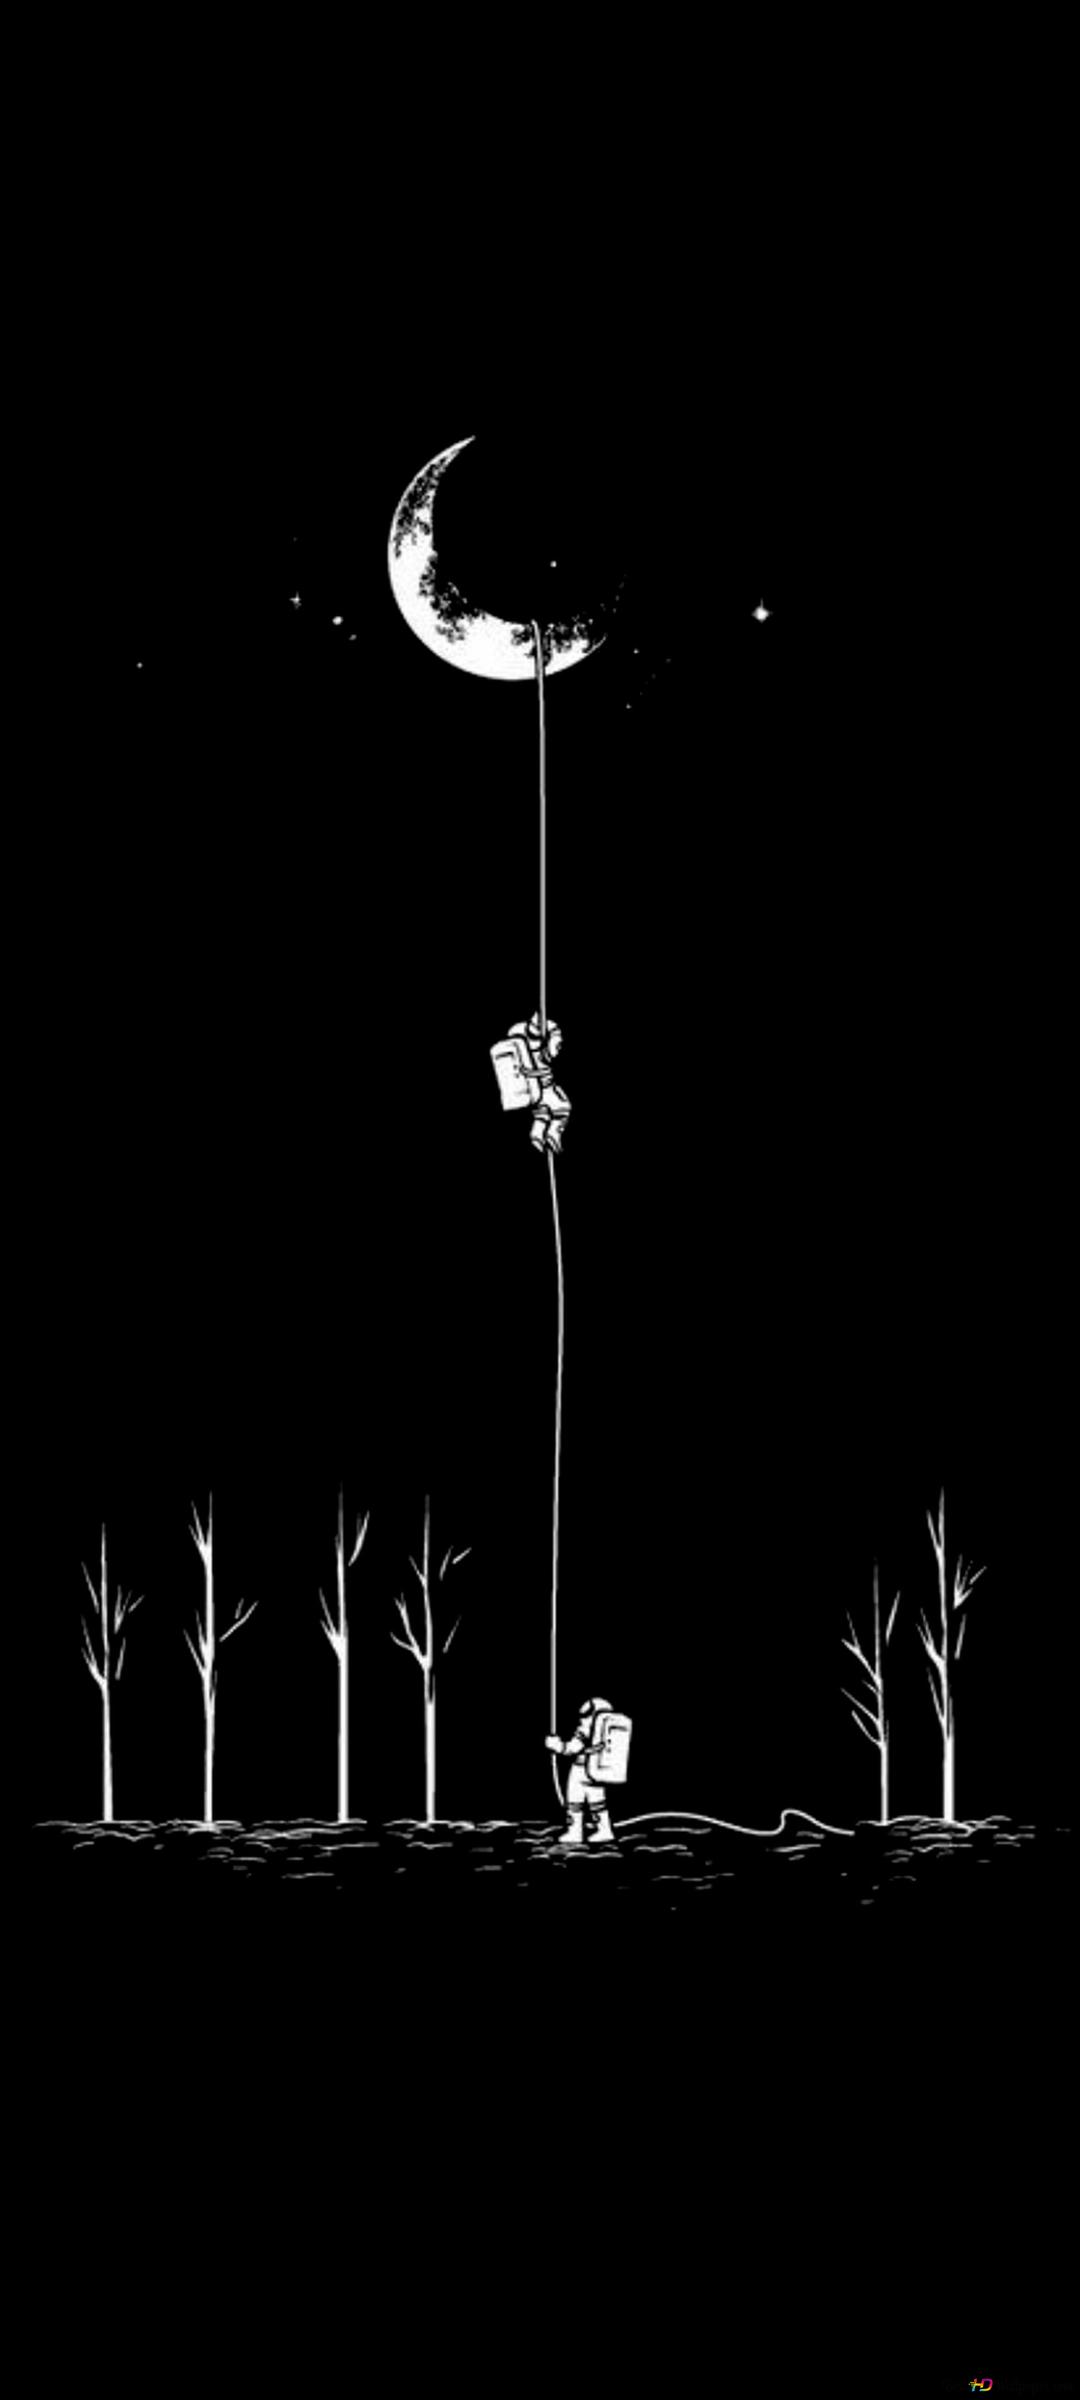 Black and white anime drawing of astronauts climbing half moon on dark background 2K wallpaper download